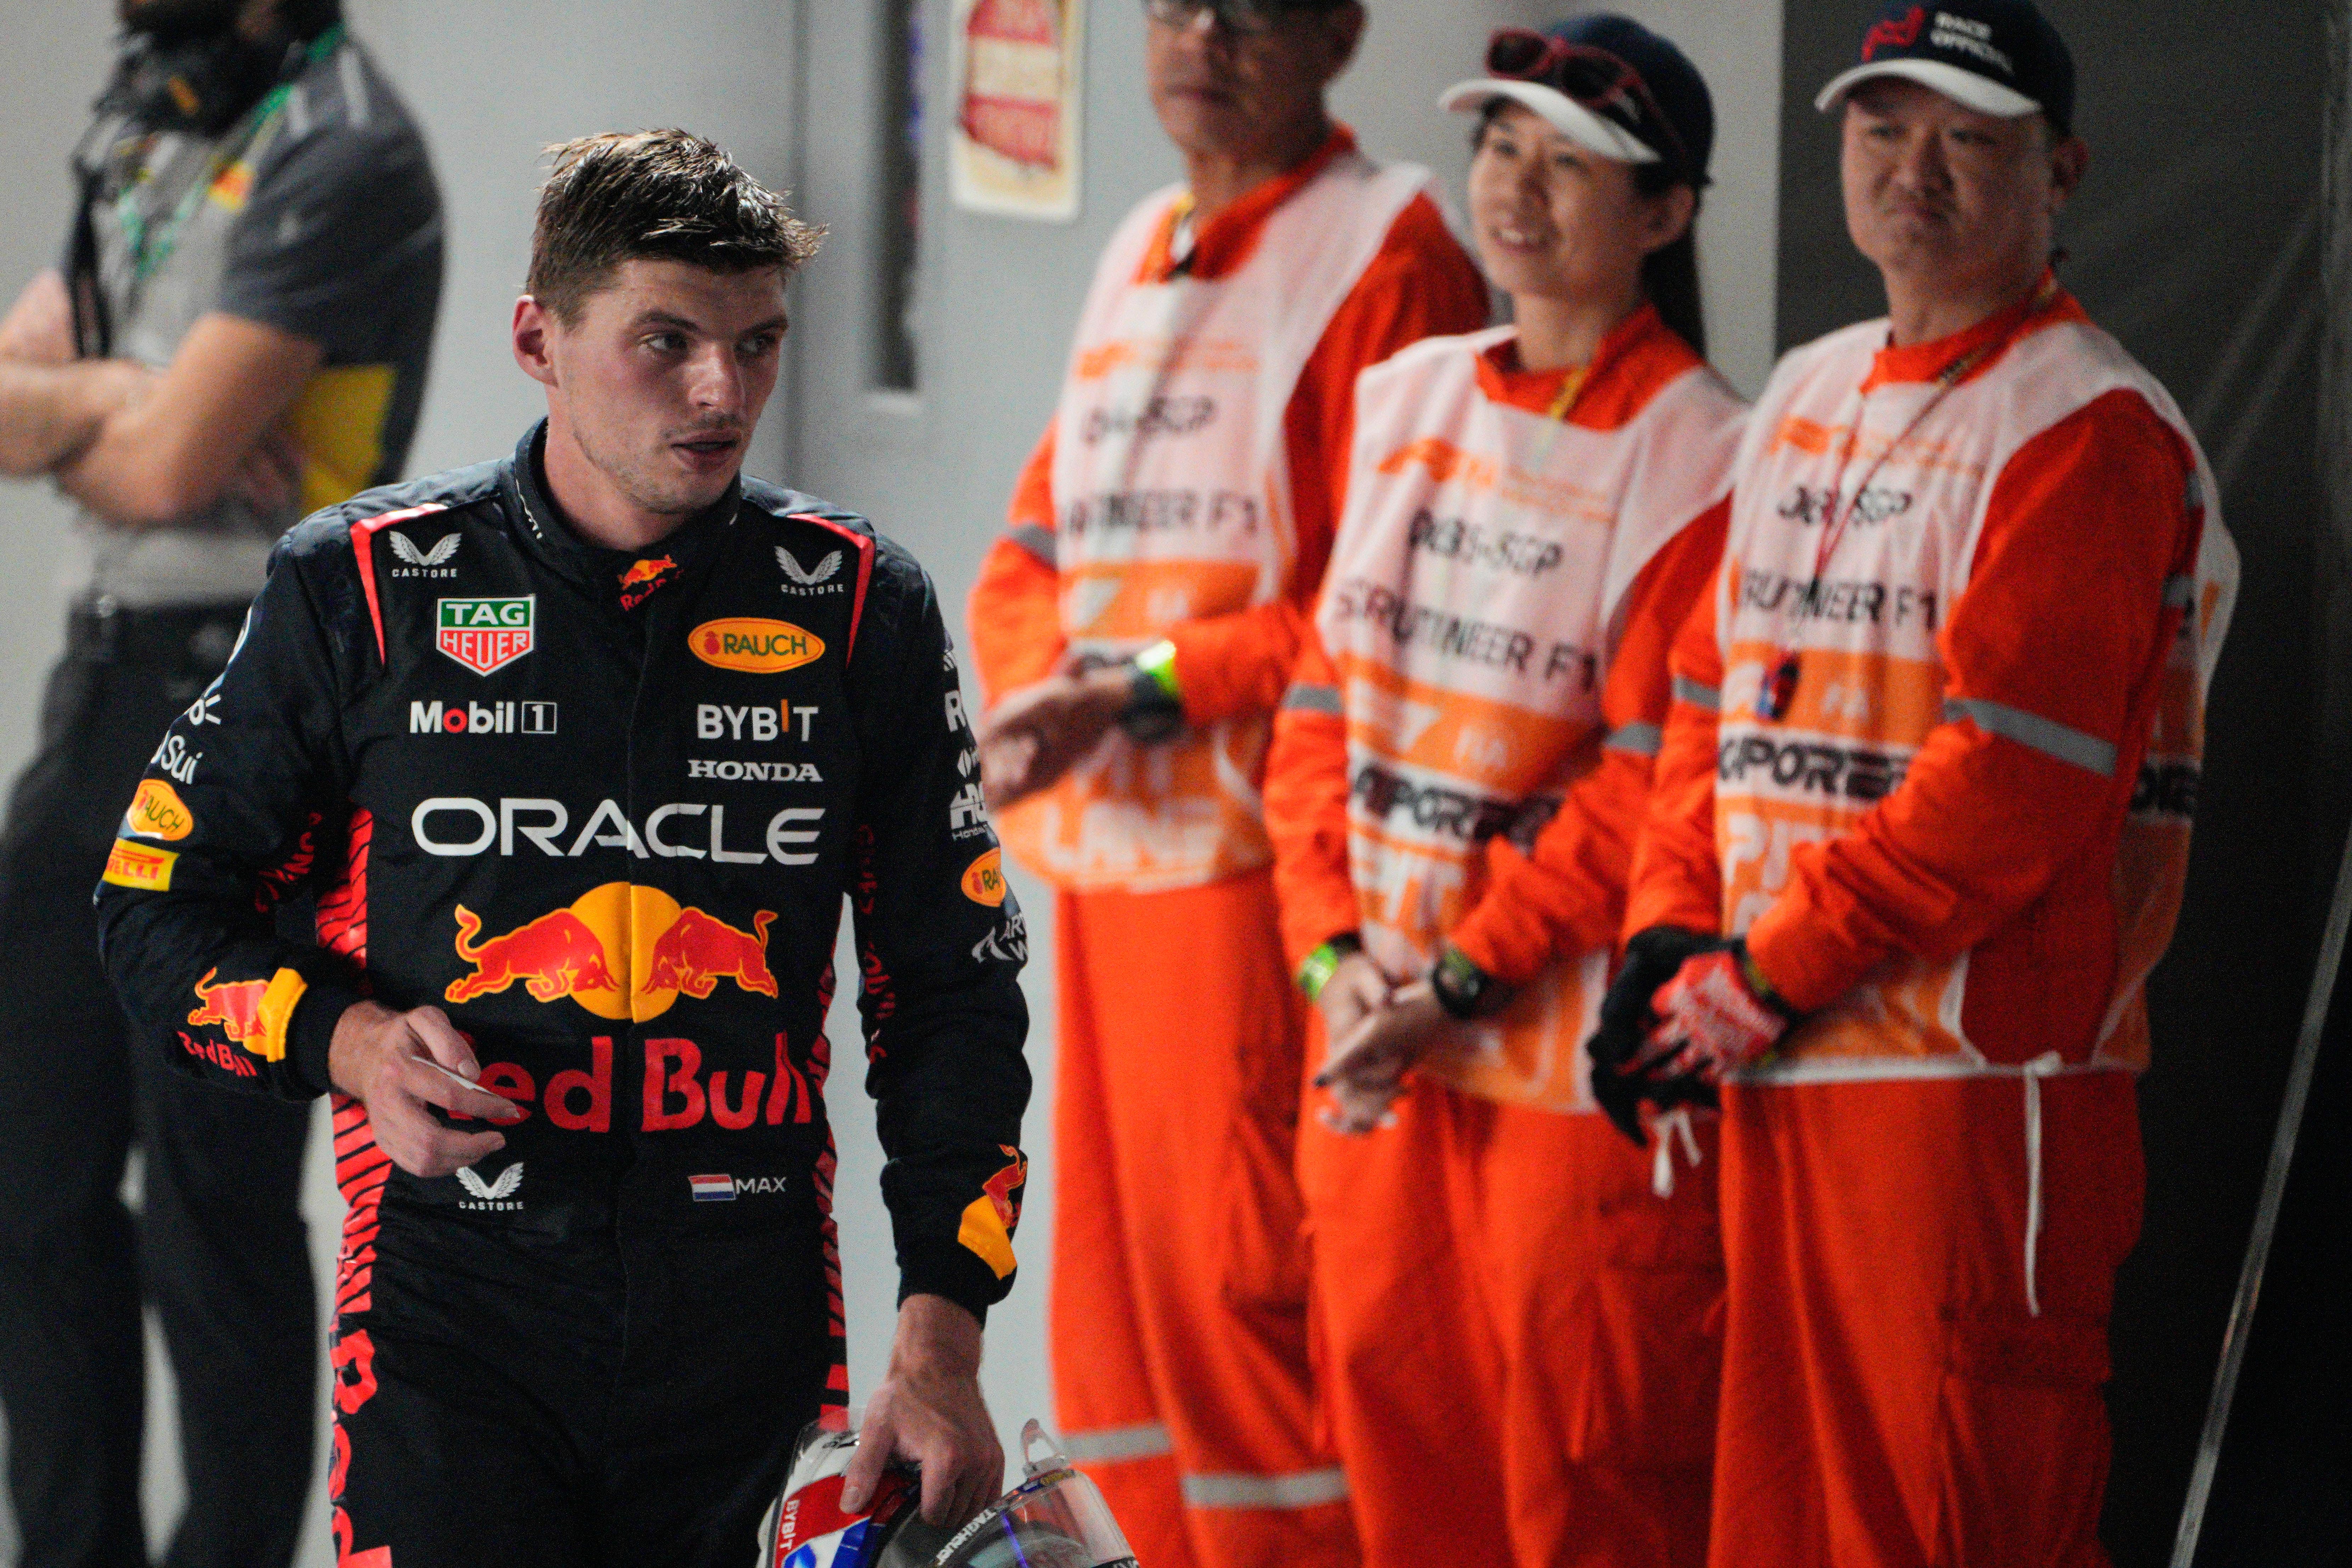 Red Bull driver Max Verstappen is confident he will get back on track at Suzuka